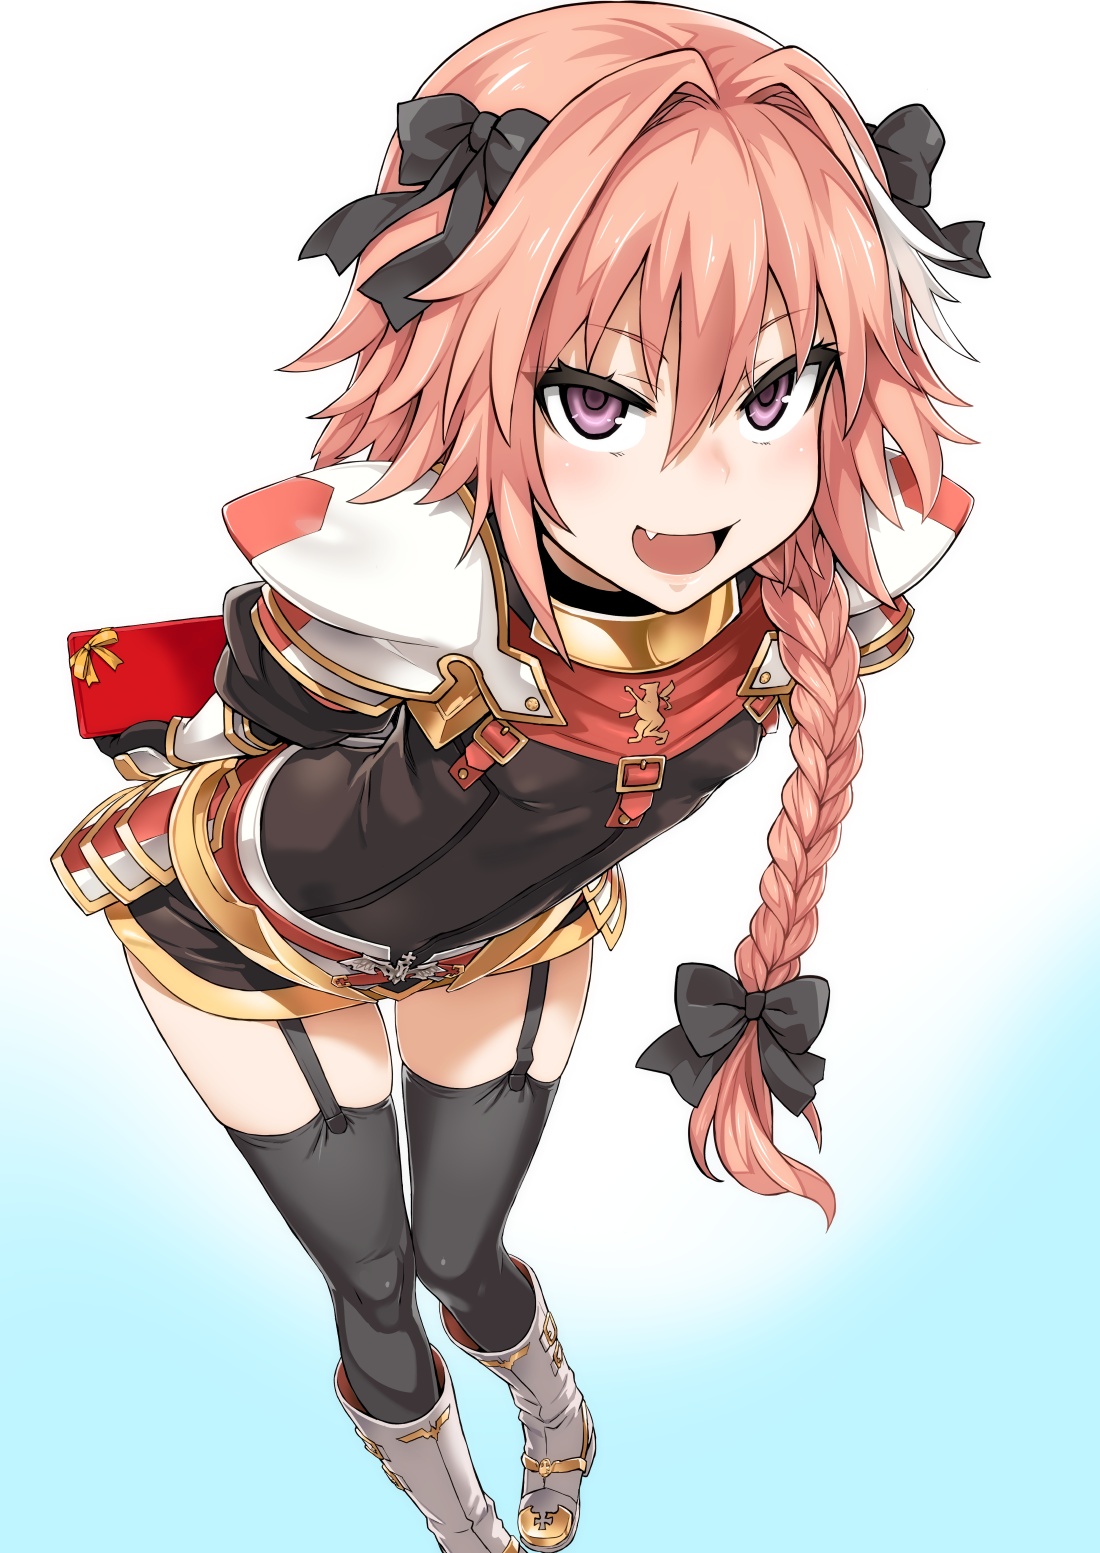 Anime 1100x1553 Fate/Apocrypha  Fate series black stockings femboy thighs legs together open mouth garter straps fangs Astolfo (Fate/Apocrypha) bangs pink hair anime boys 2D anime portrait display gradient Fate/Grand Order fan art Asanagi ecchi